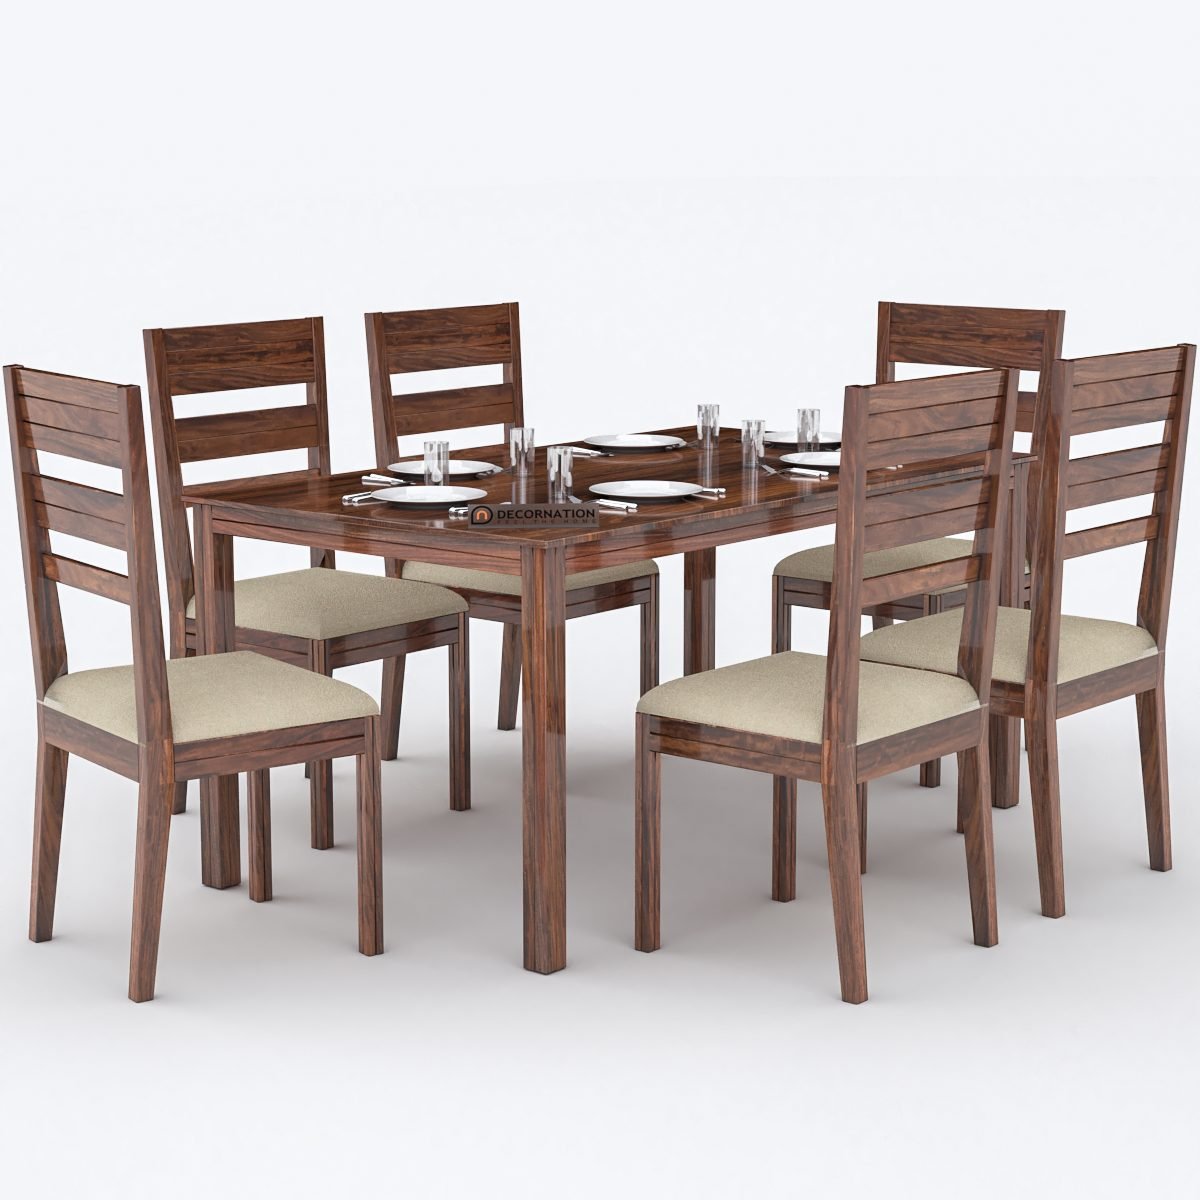 Luna Dining Table Set – 6 Seater